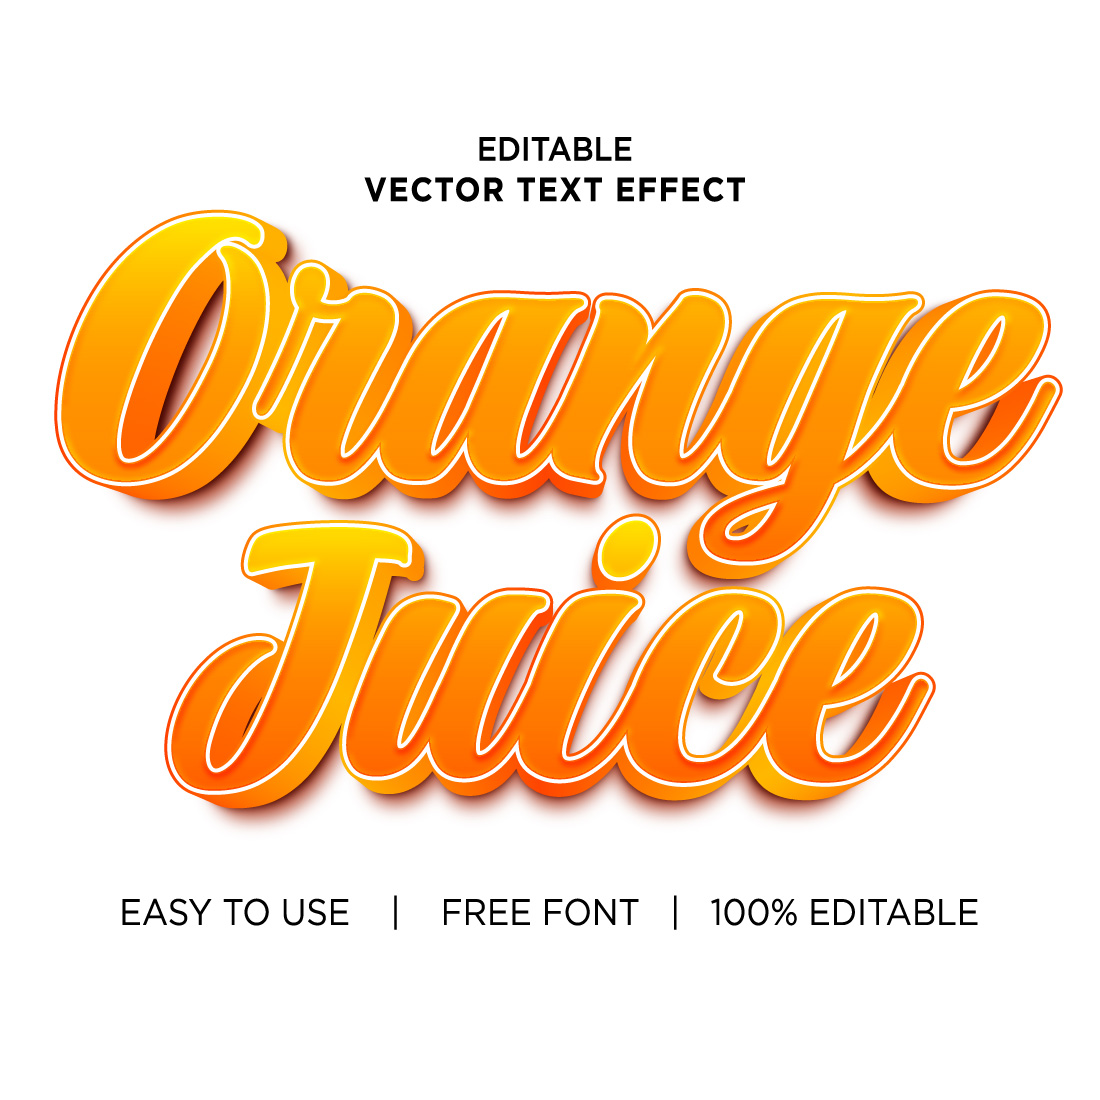 Orange juicy 3d text effects vector illustrations New Text style eps files Editable text effect vector cover image.